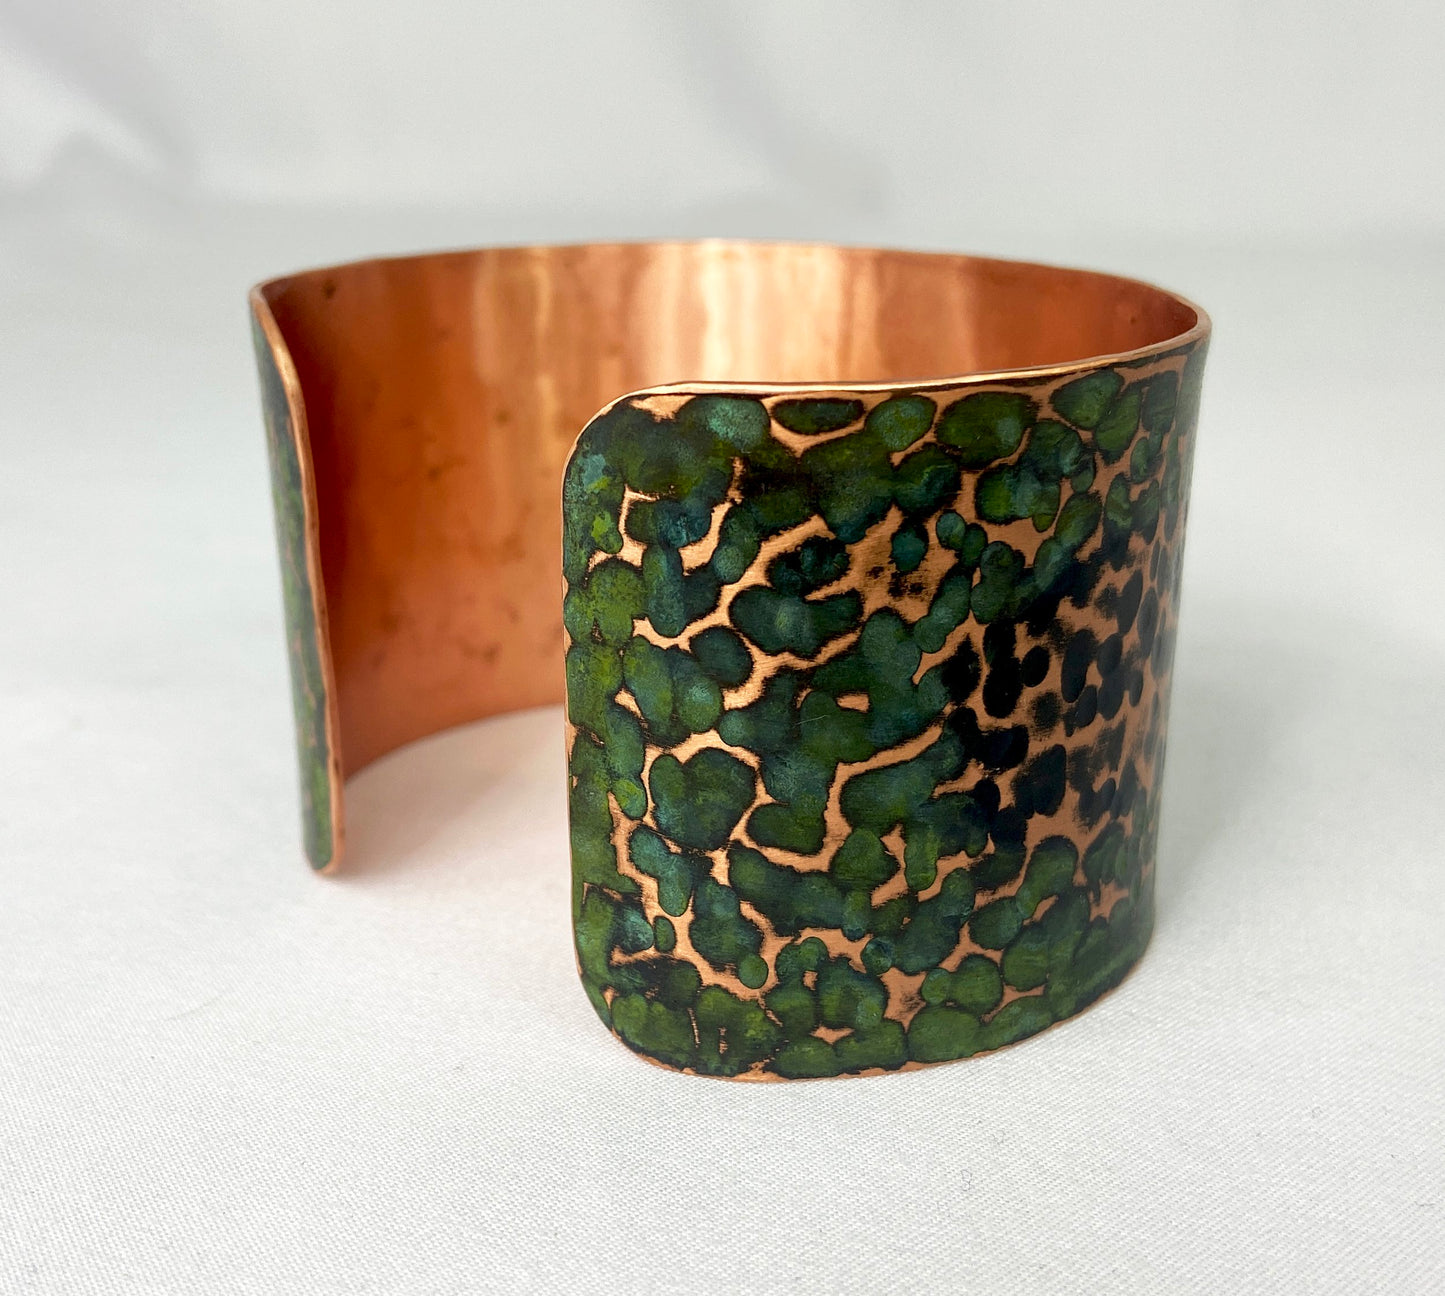 Large sized Hammered Copper Cuff Bracelet with Antique and Green